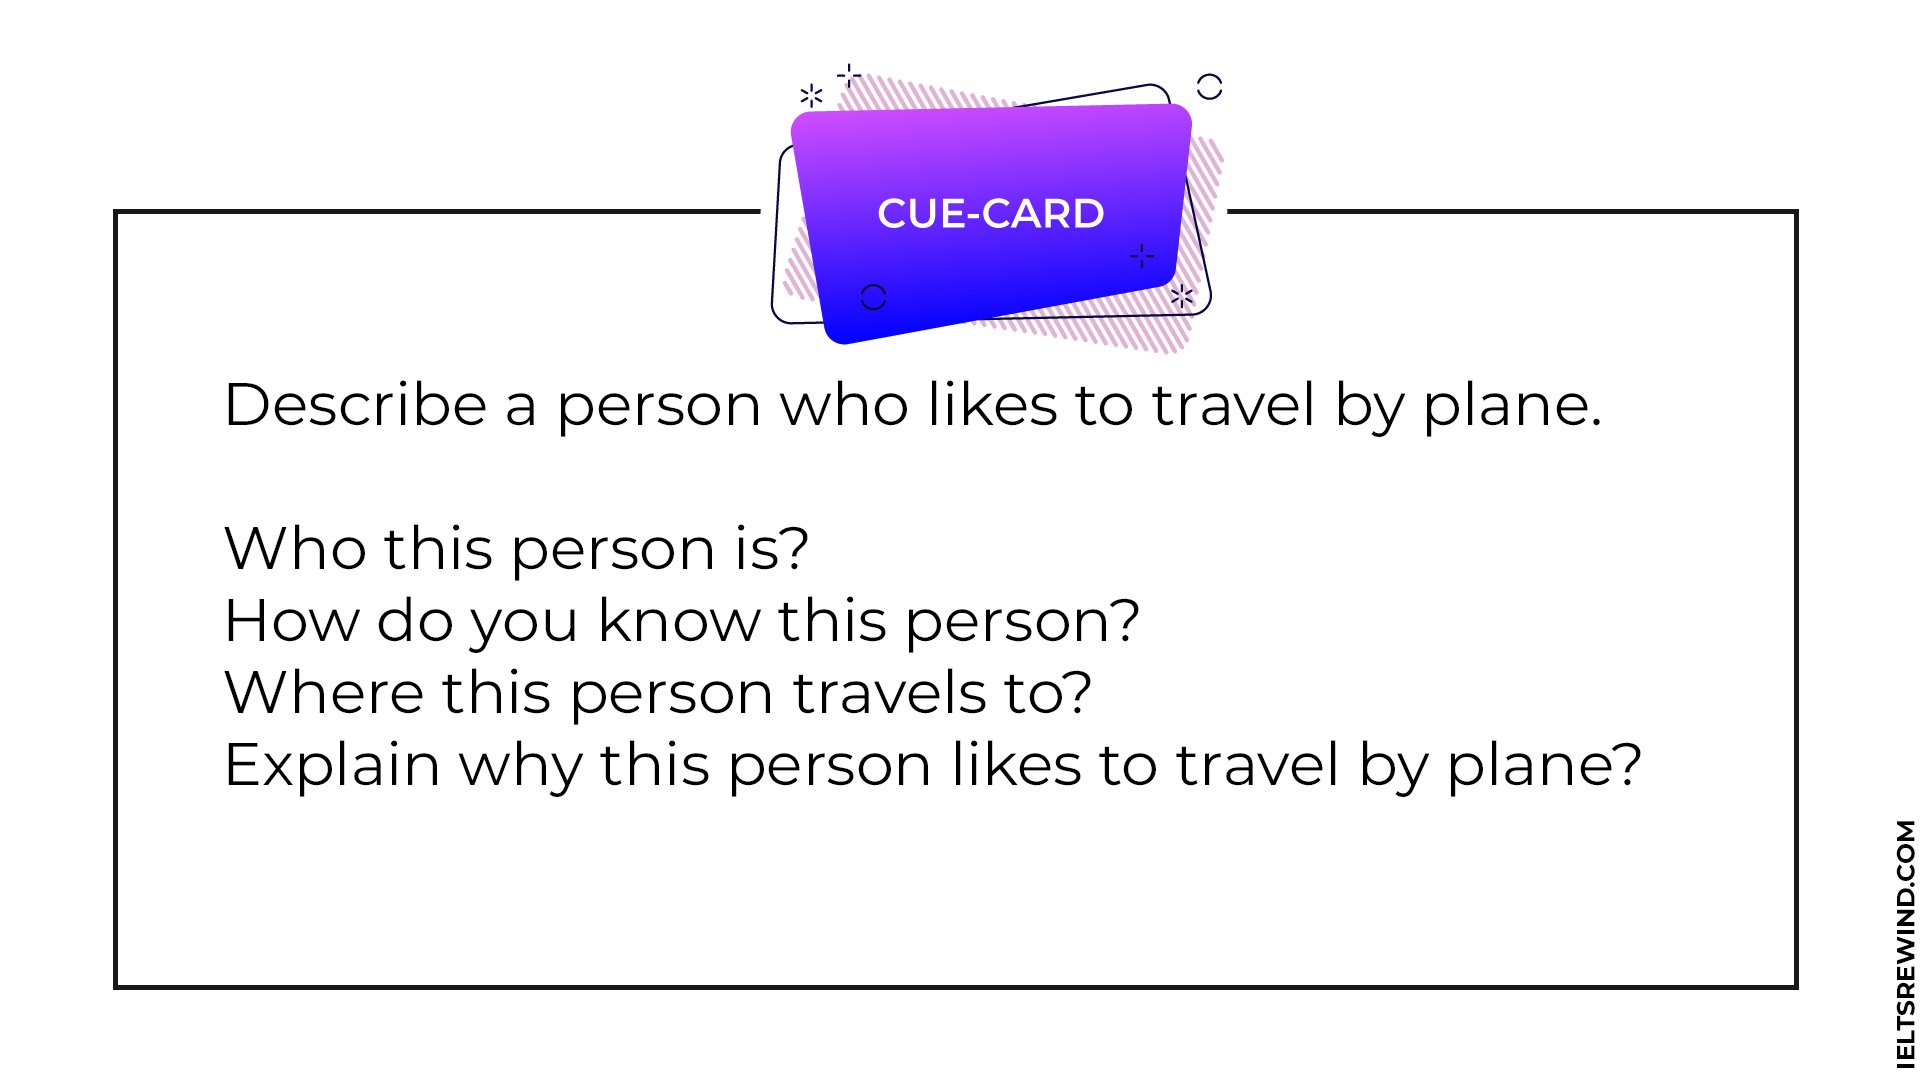 Describe a person who likes to travel by plane IELTS cue card